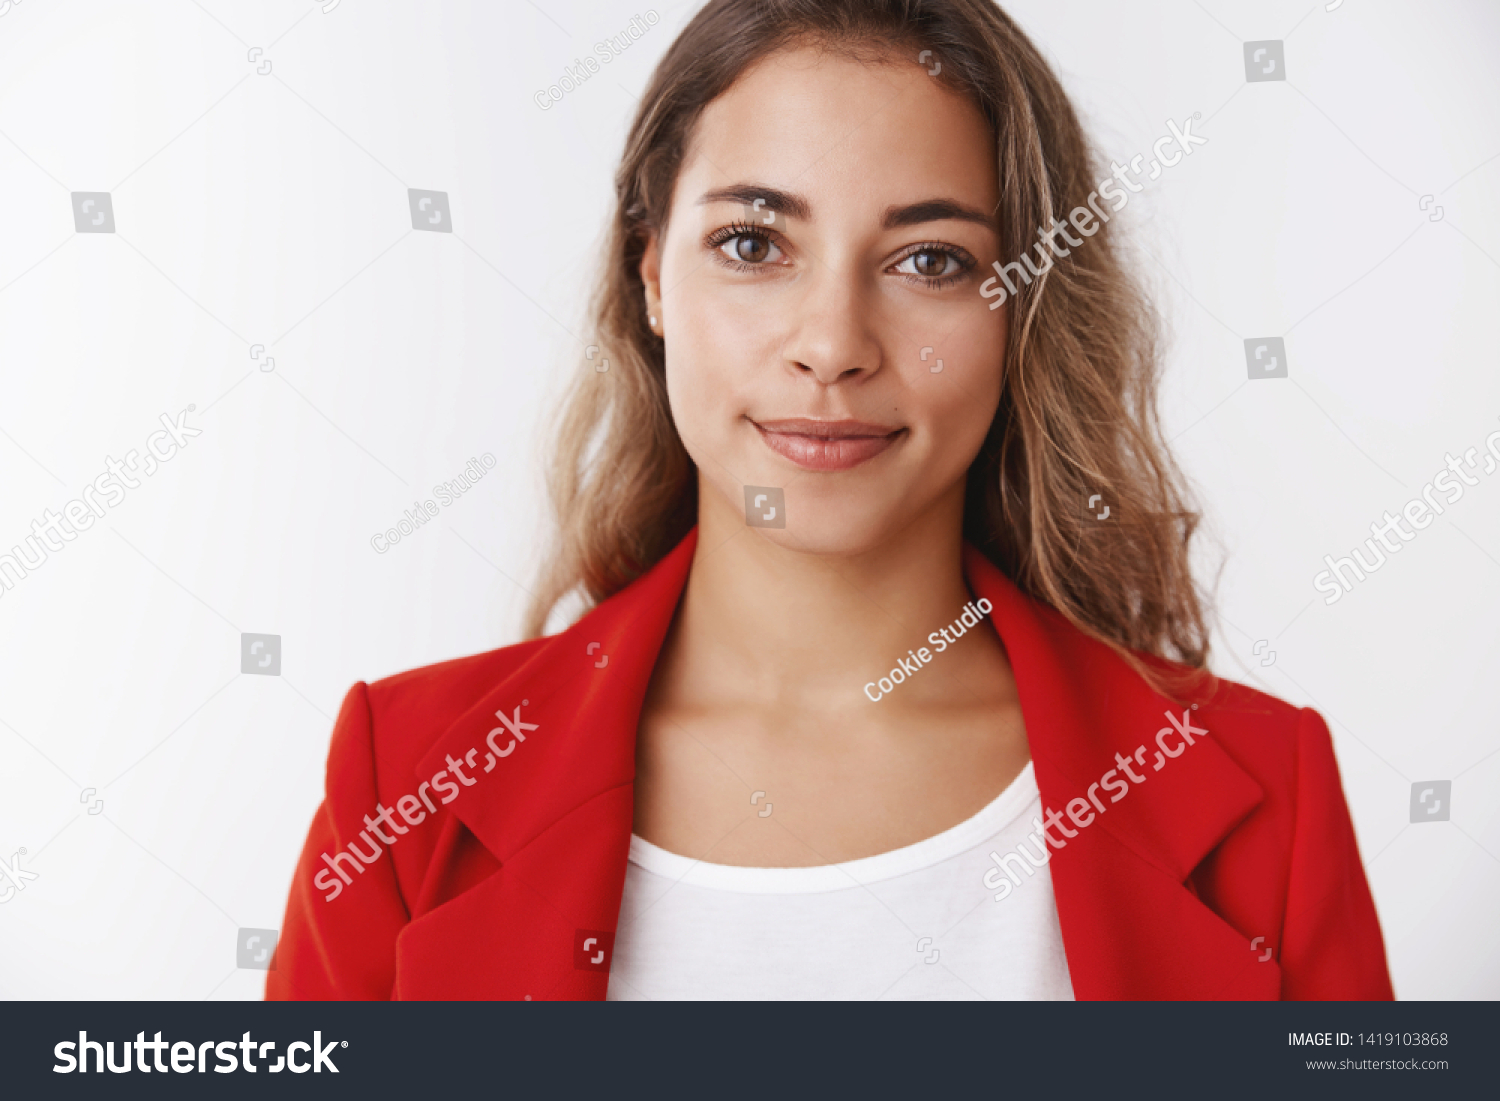 Portrait confident successful good-looking happy young curly-haired modern businesswoman wearing red jacket smiling self-assured expressing positive lucky vibe, grinning ambitious reach goal #1419103868